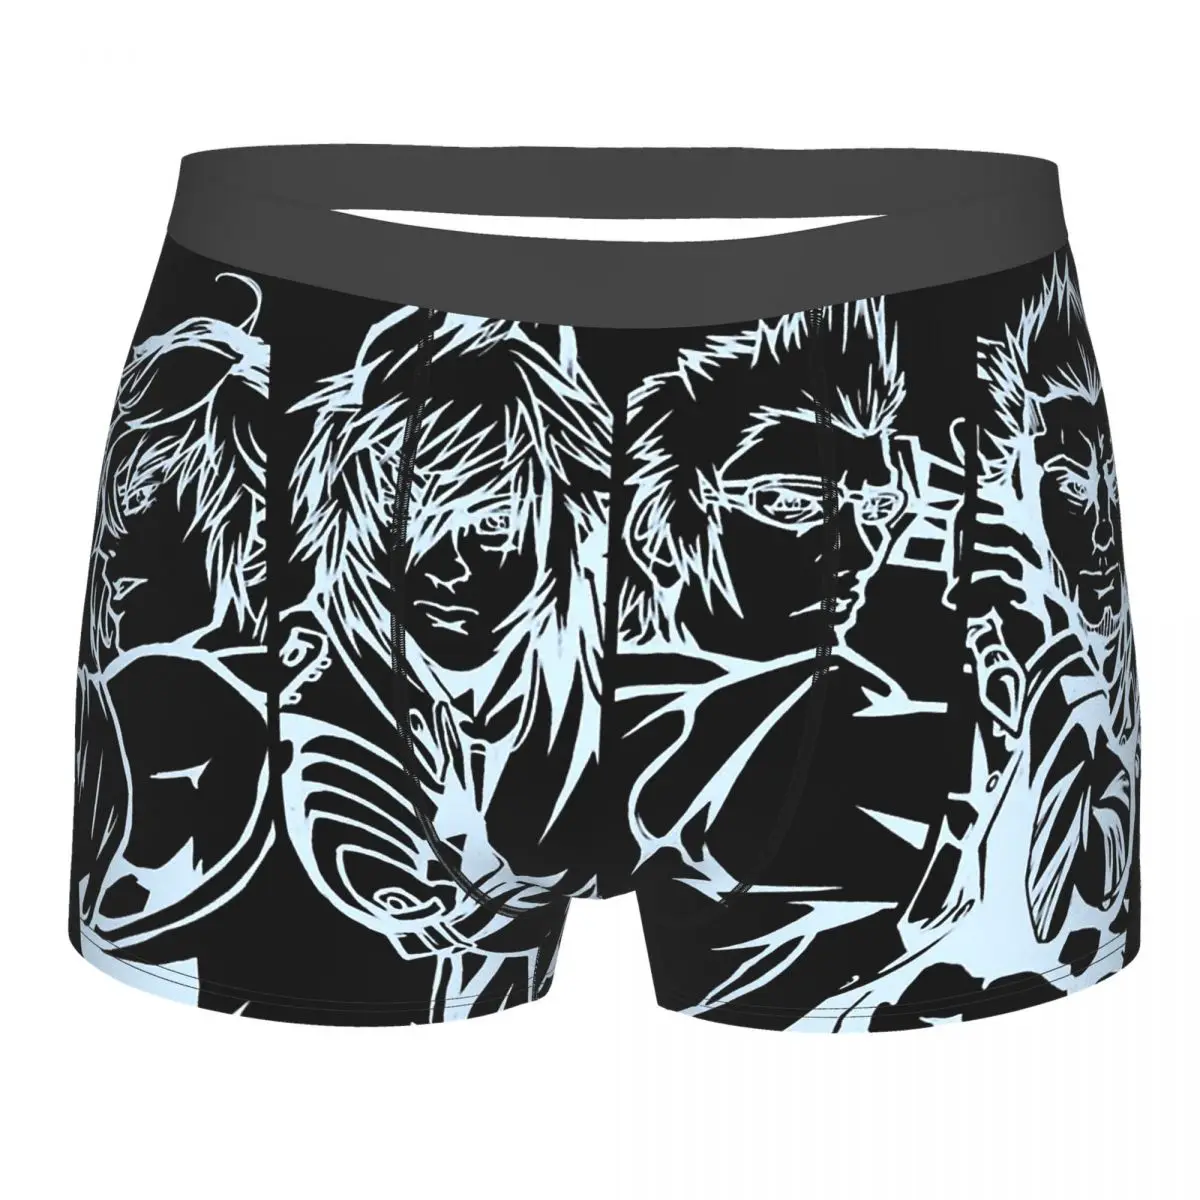 

CAST Final Fantasy Role-playing Game Underpants Breathbale Panties Men's Underwear Print Shorts Boxer Briefs